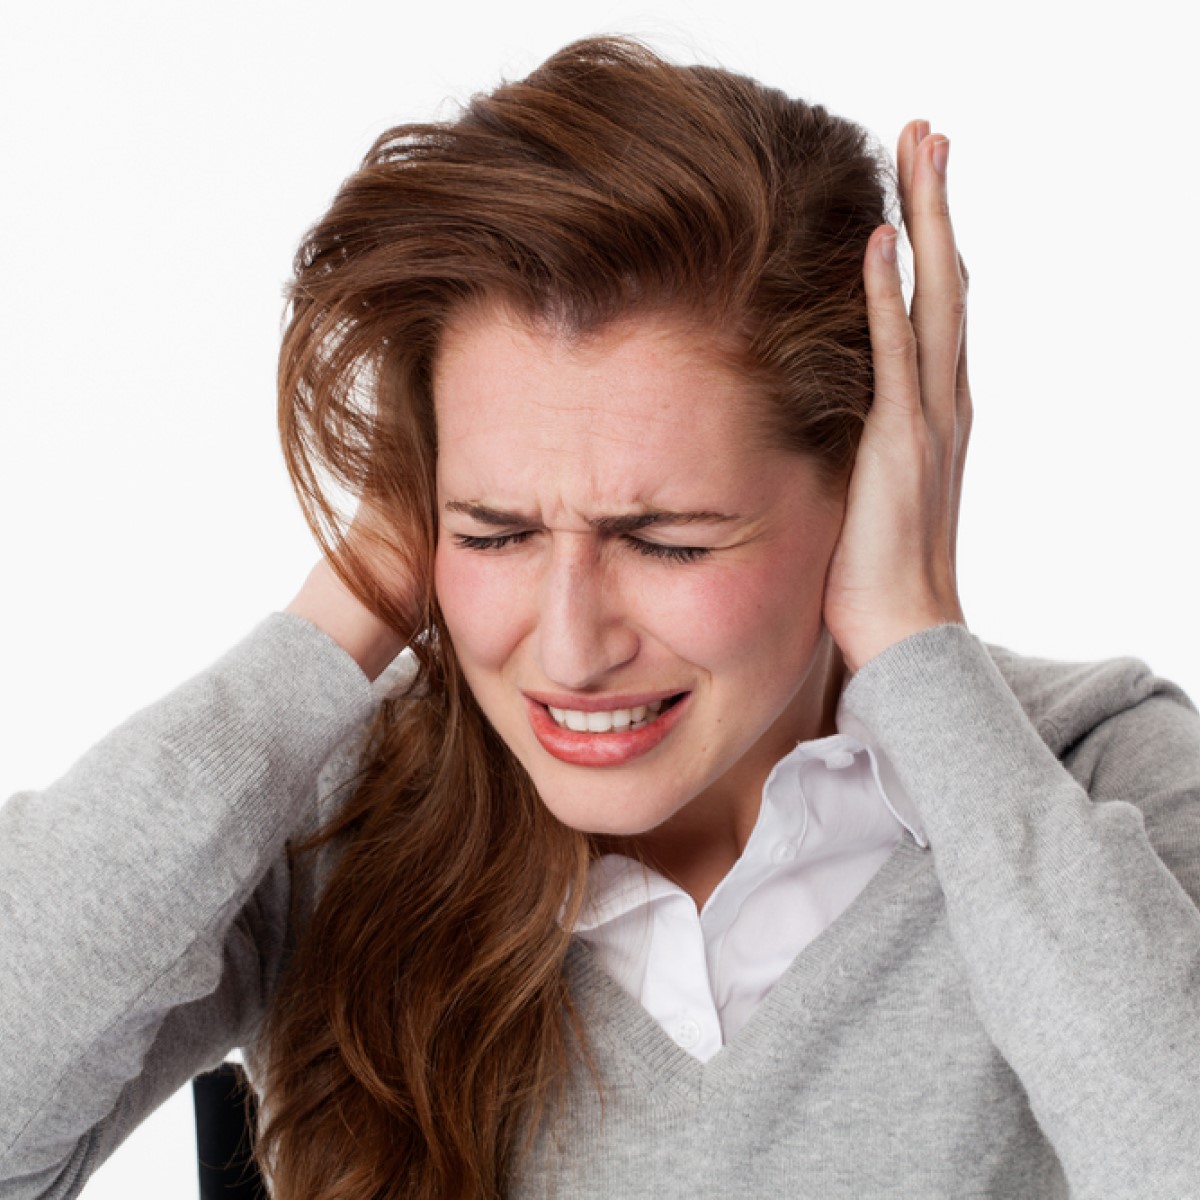 Read more about the article TINNITUS (RINGING IN THE EARS) – Symptoms, Causes, And Natural Remedies For Tinnitus Treatment